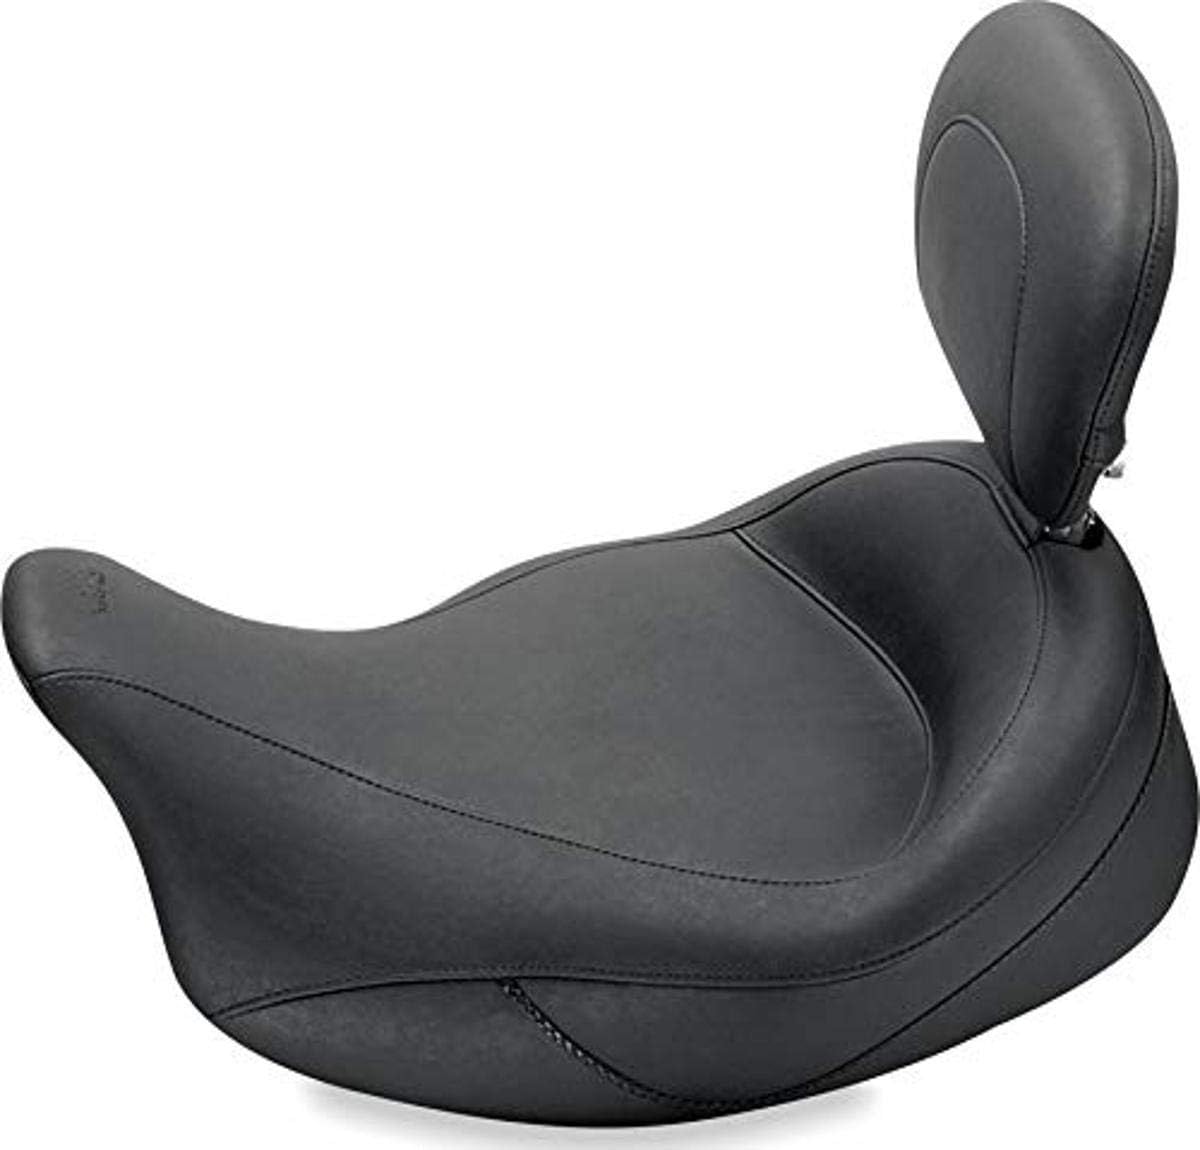 Mustang Motorcycle Seats 79006 Super Touring Deluxe One-Piece Seat for Harley-Davidson Electra Glide Standard, Road Glide, Road King  Street Glide 2008-21, Deluxe, Black, Extended Reach - Mustang Motorcycle Seats 79006 Super Touring Deluxe One-Piece Seat Review